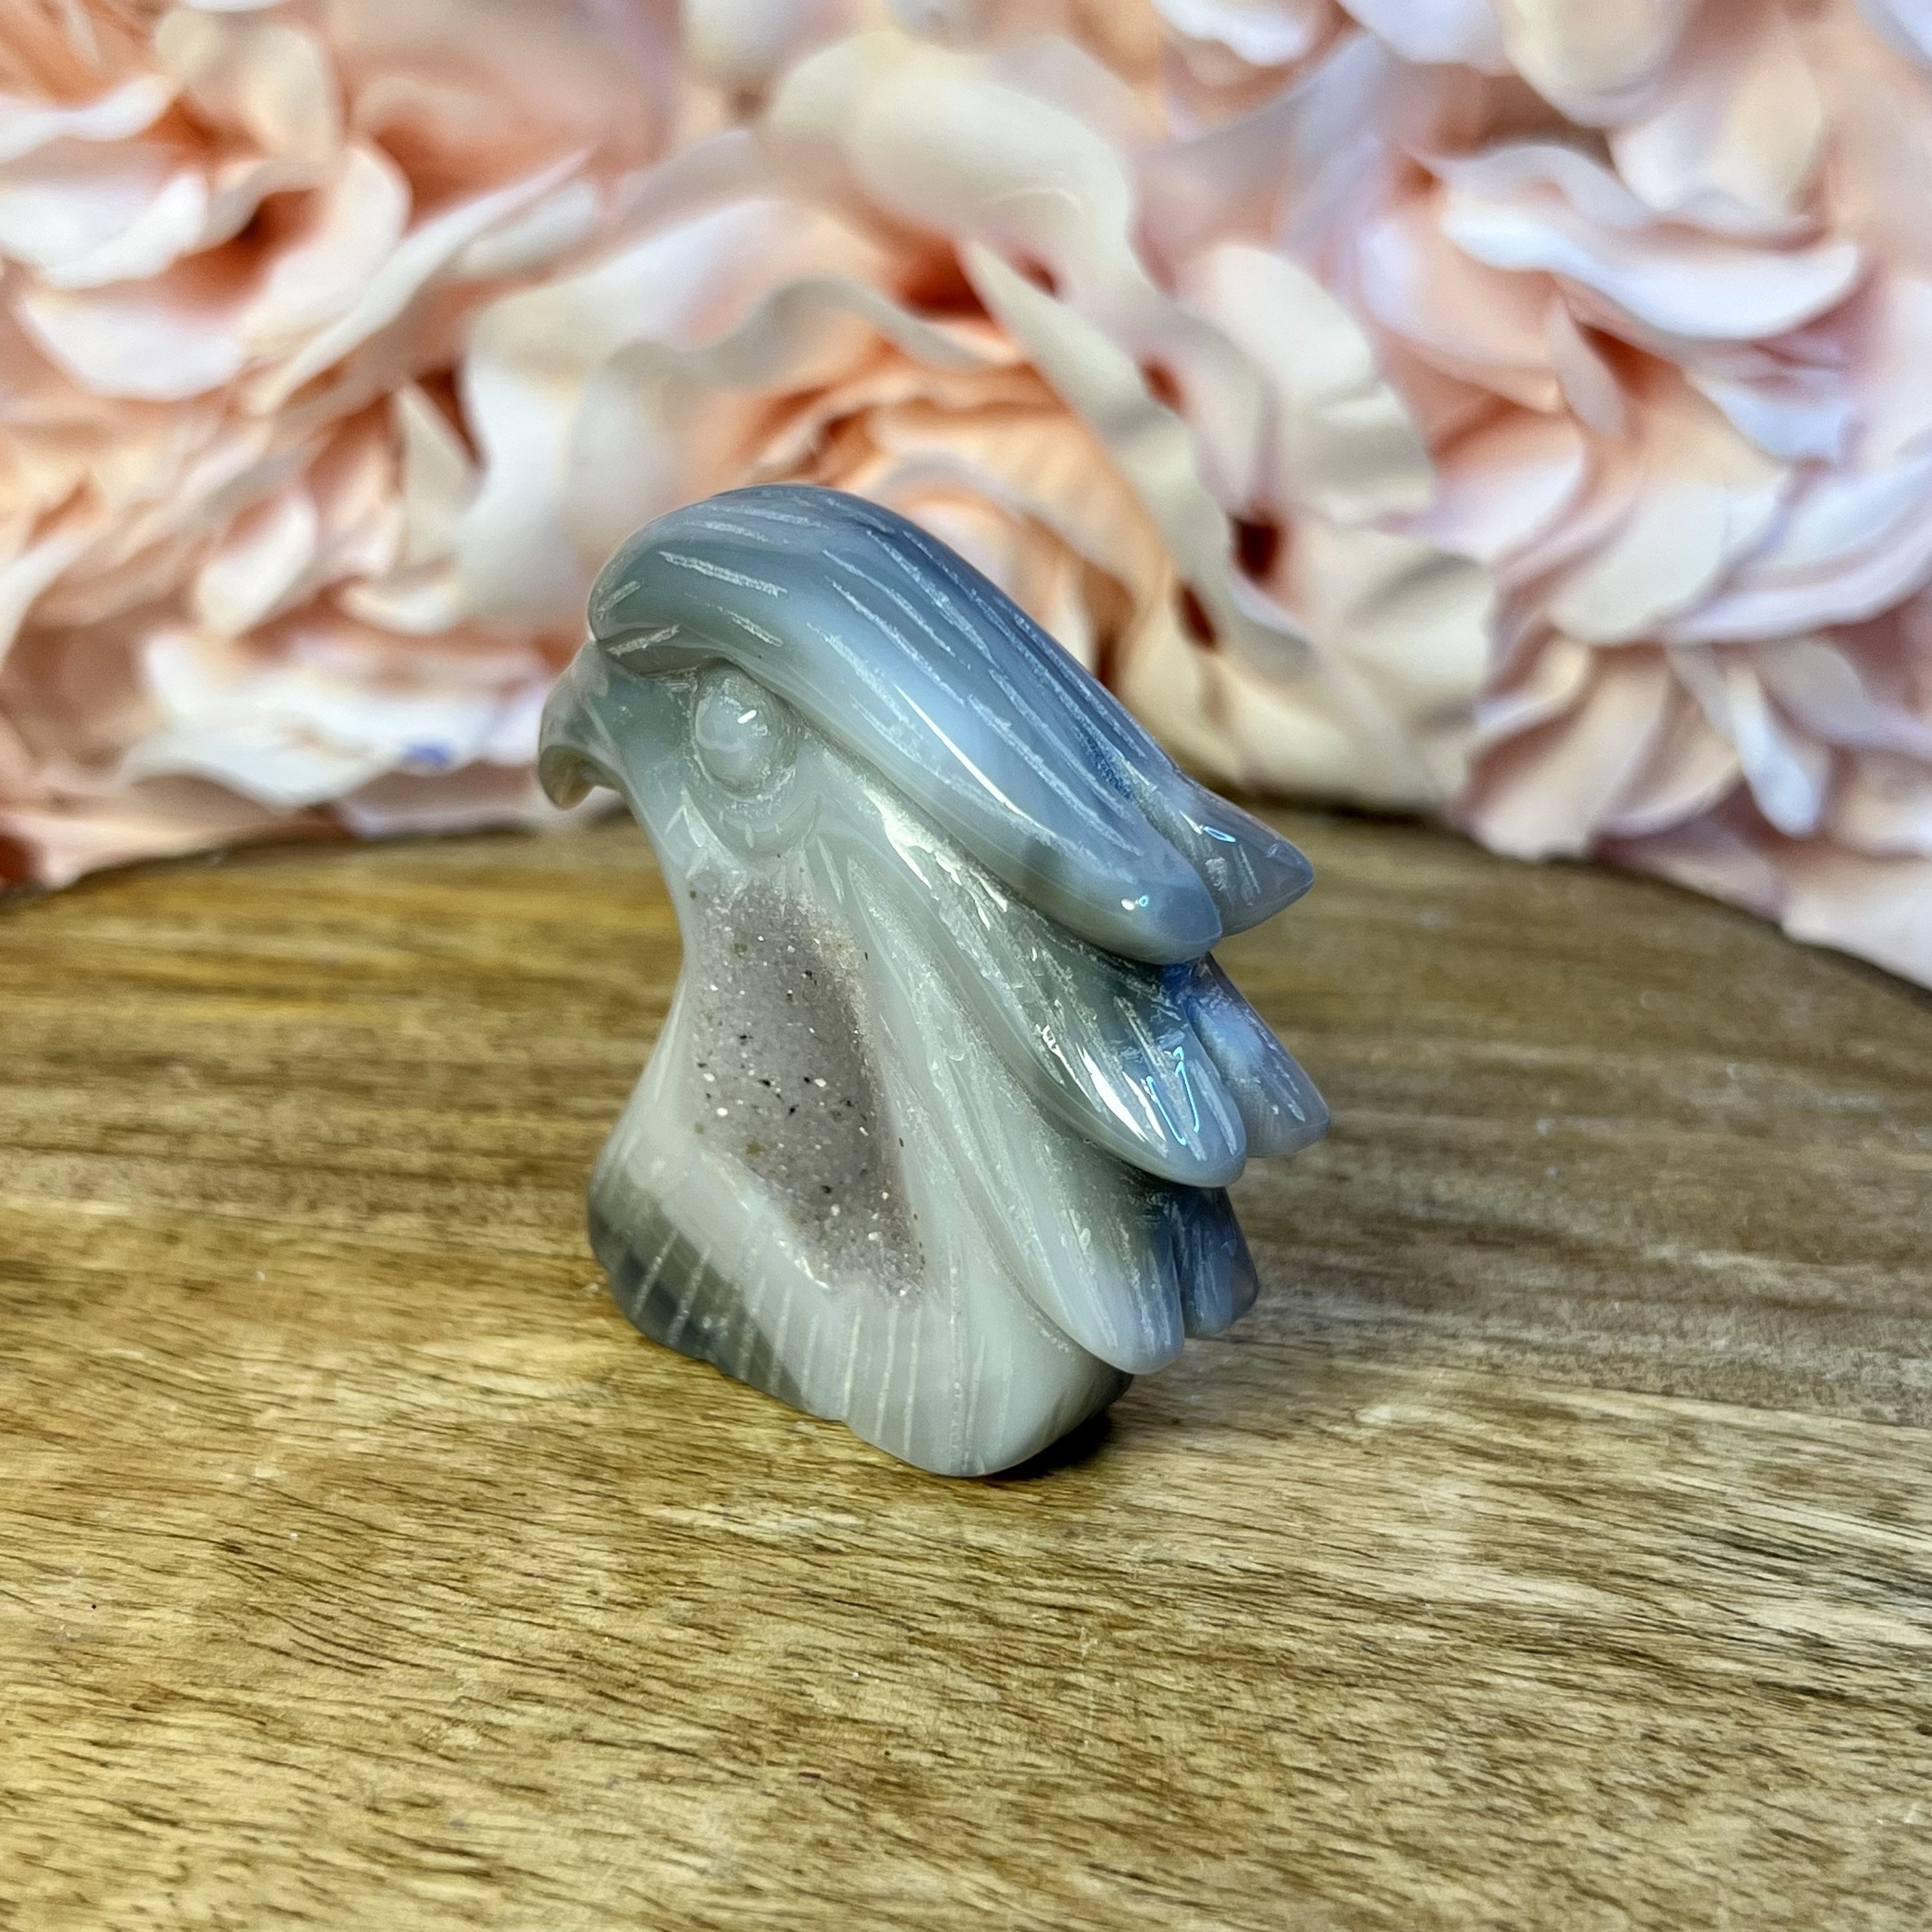 Blue Chalcedony carving US Seller 2.22 inches Tall Free Shipping #2 Beautiful Sparkling Druzy Agate Eagle